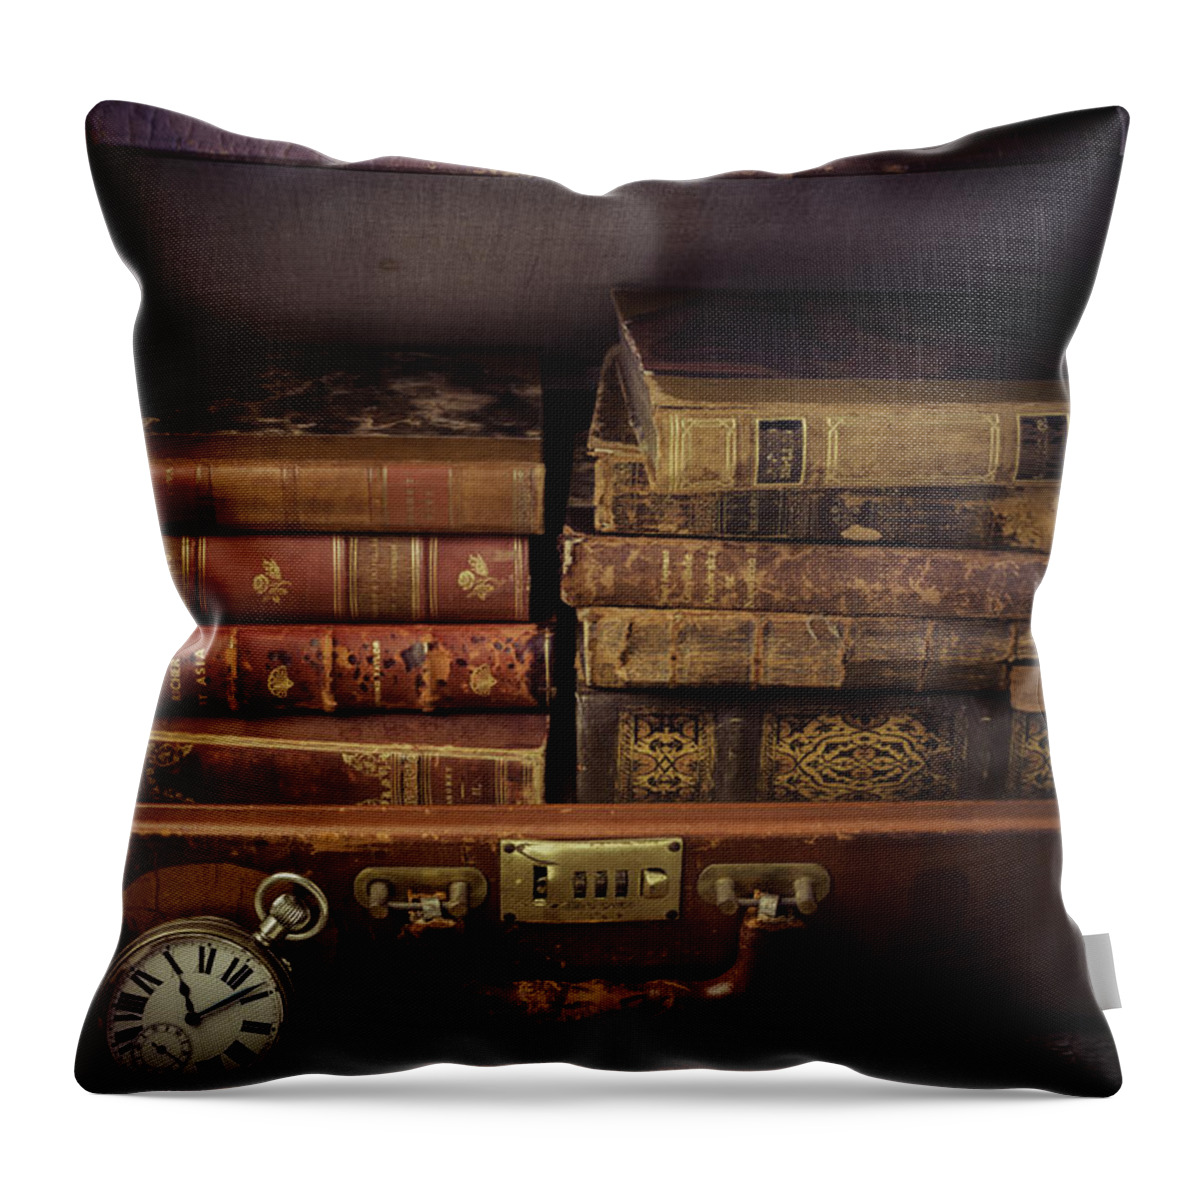 Book Throw Pillow featuring the photograph Suitcase Full Of Books by Garry Gay